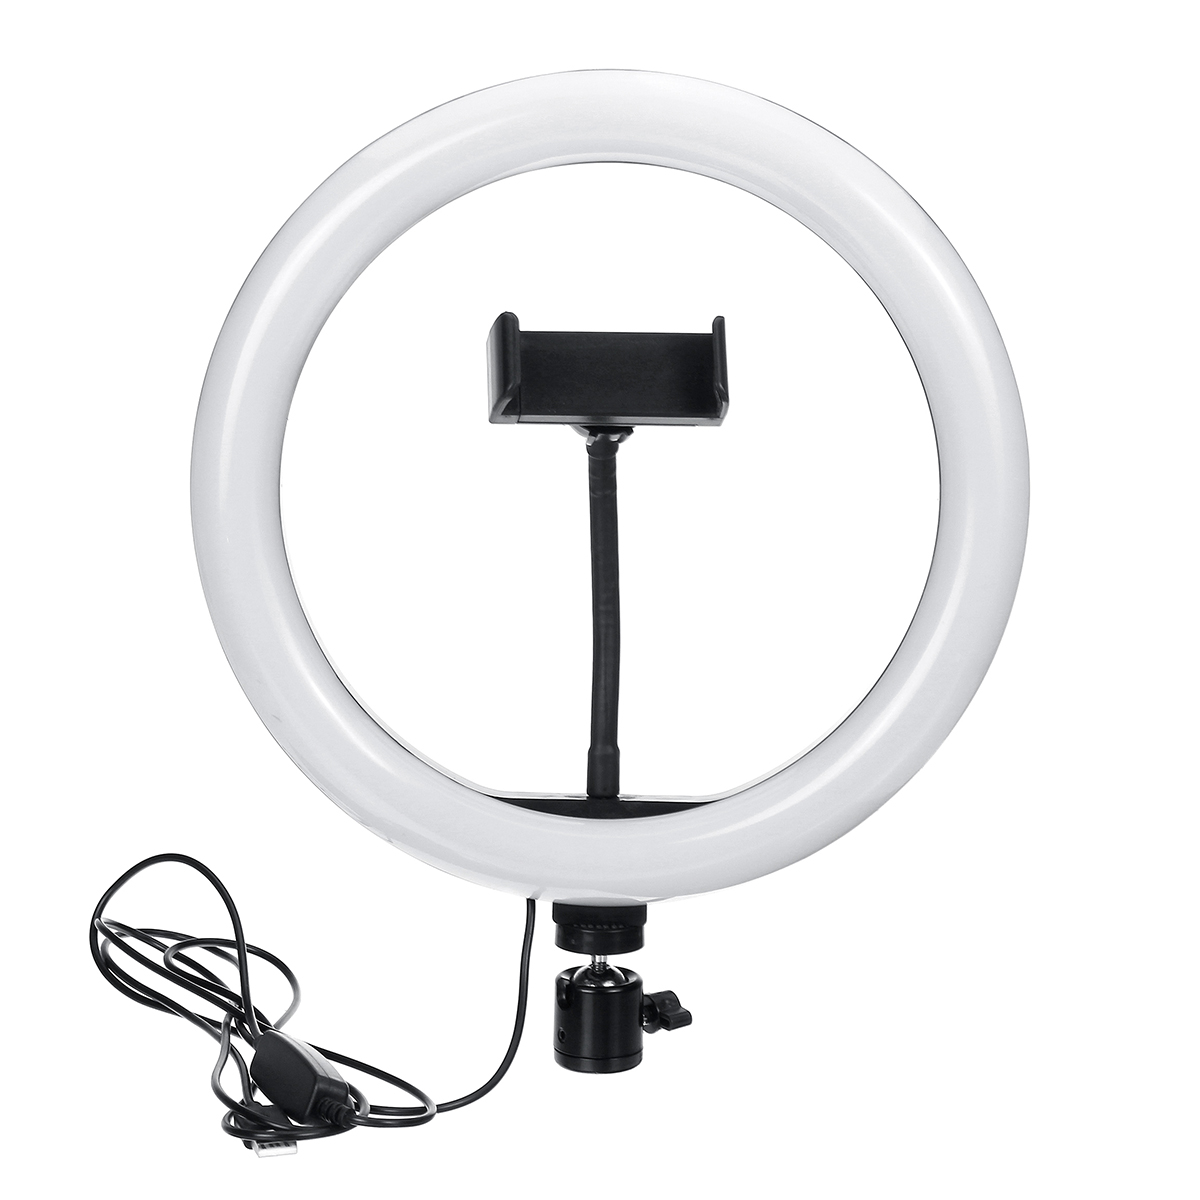 10-Inch-2700K-6500K-3-Color-Temperature-Dimmable-LED-Ring-Light-Makeup-Fill-Light-for-Live-Broadcast-1734746-7